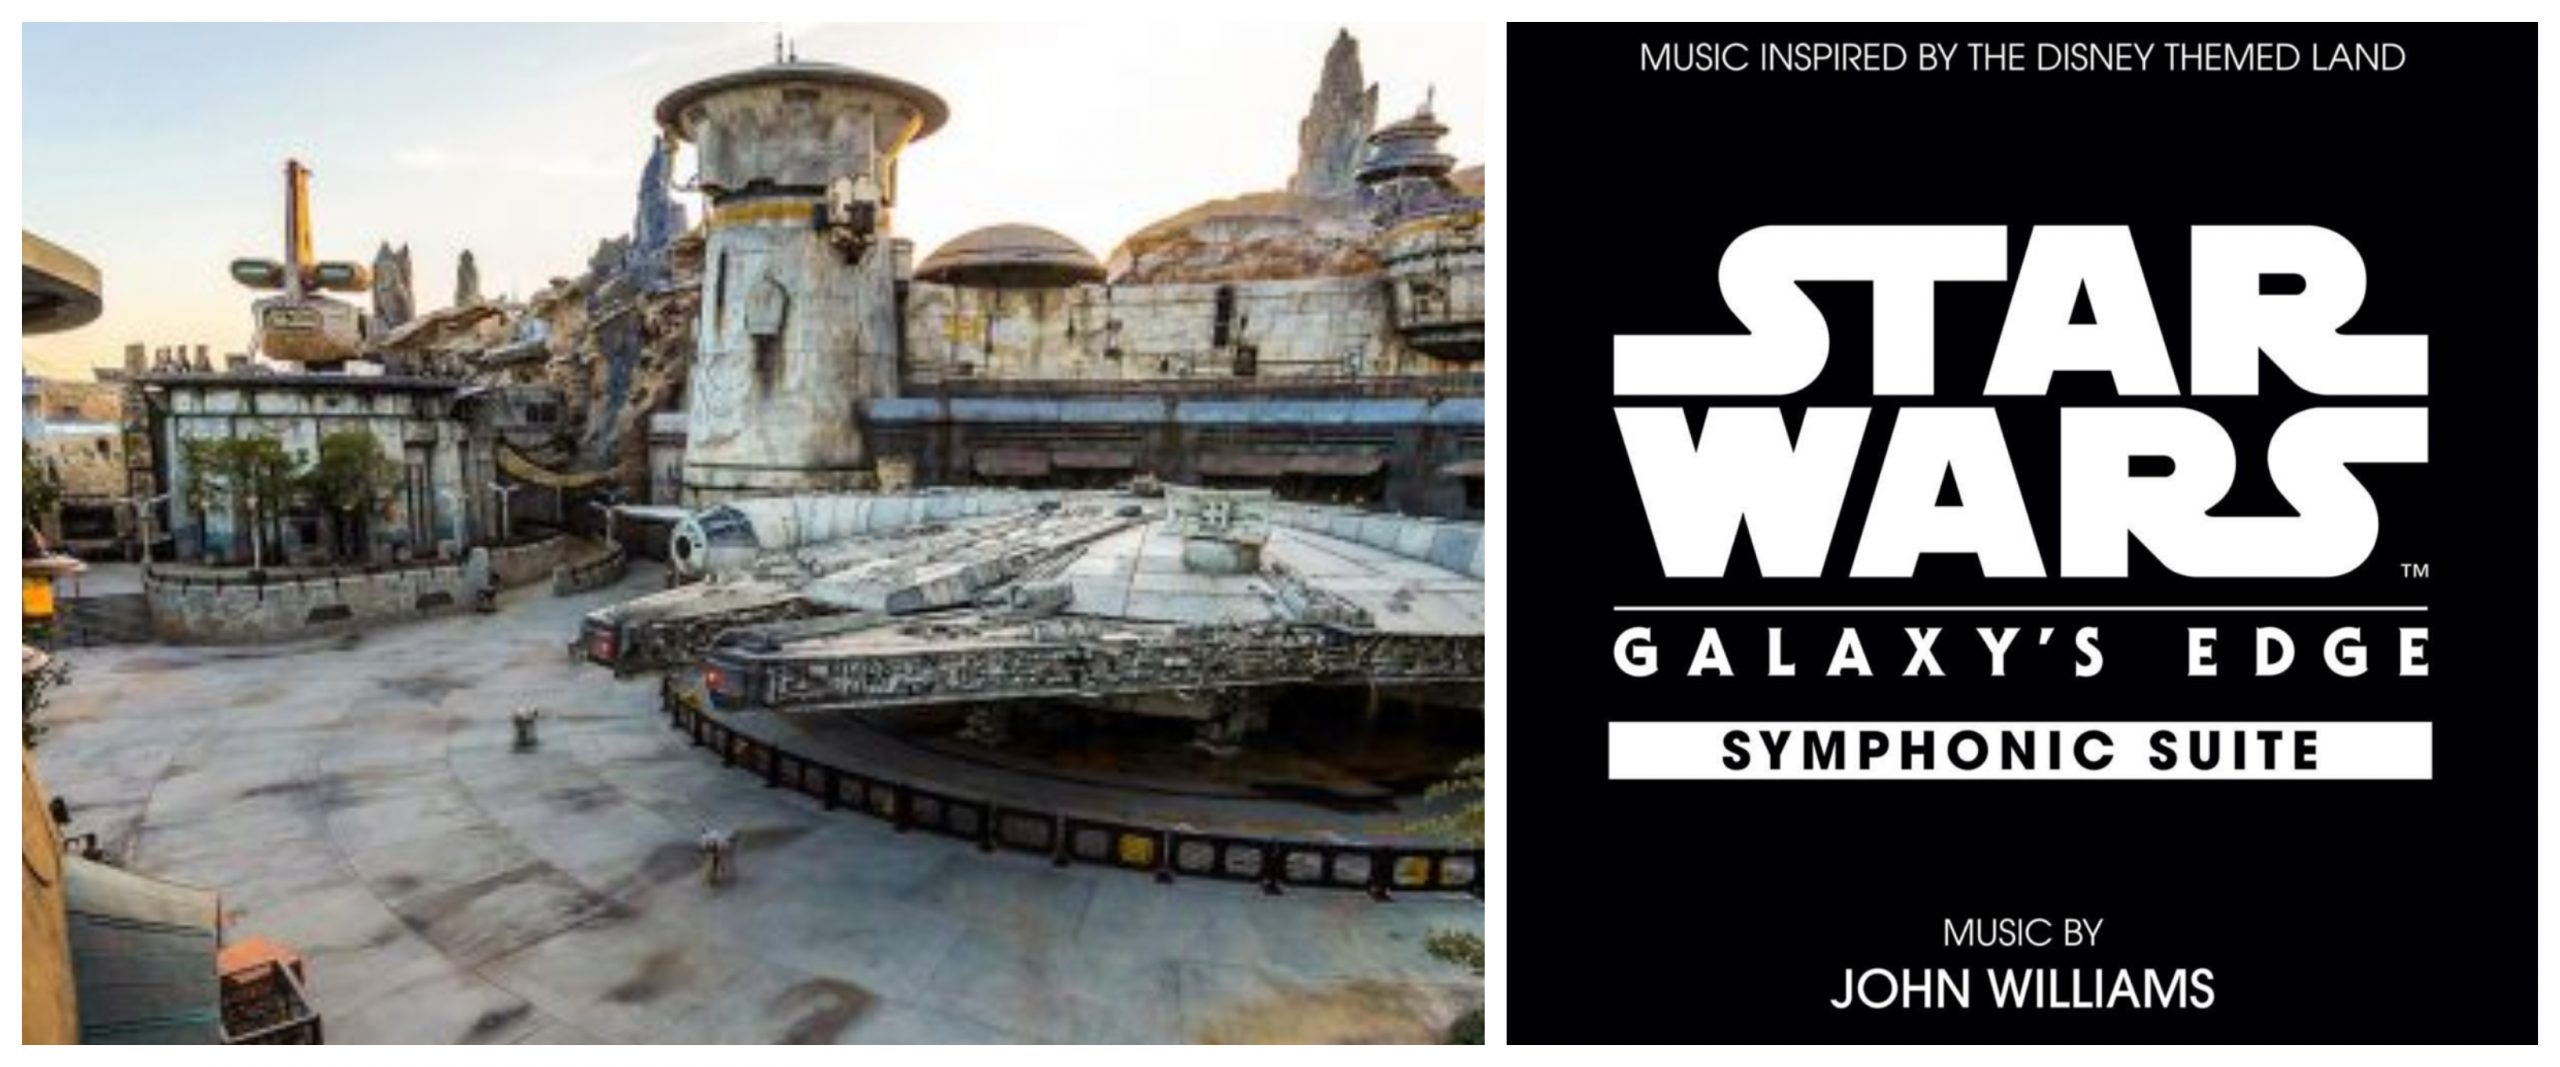 John Williams wins a Grammy for Star Wars: Galaxy’s Edge Symphonic Suite